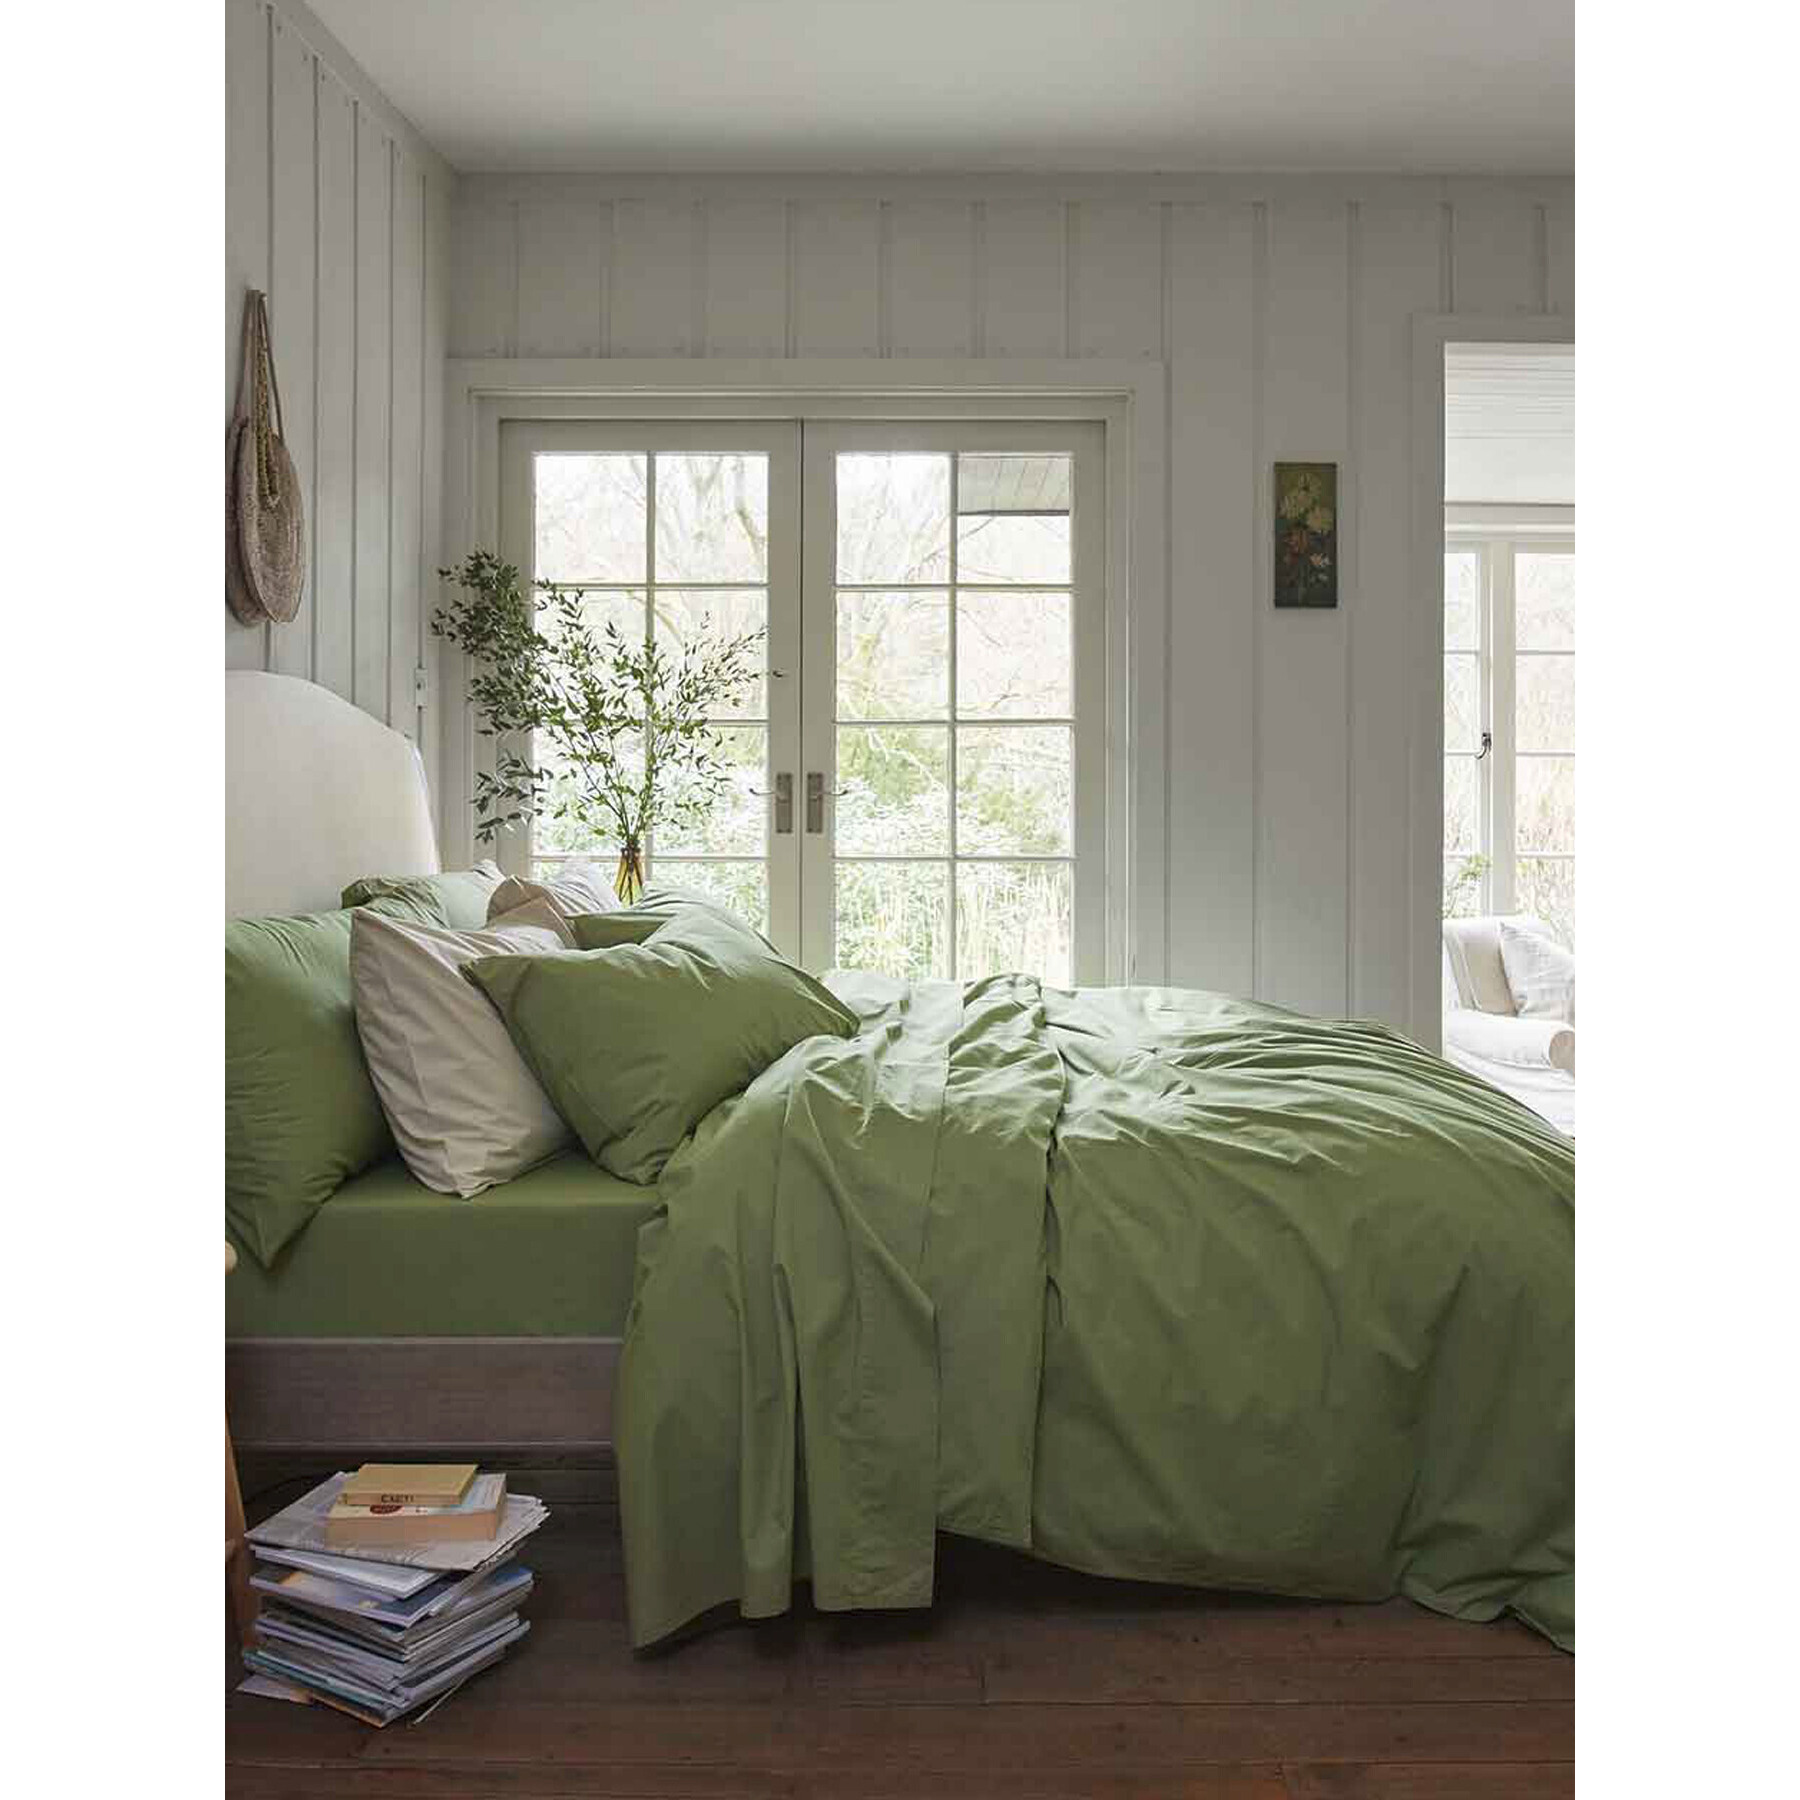 Piglet in Bed Plain Cotton Flat Sheet - Size Double Green - image 1